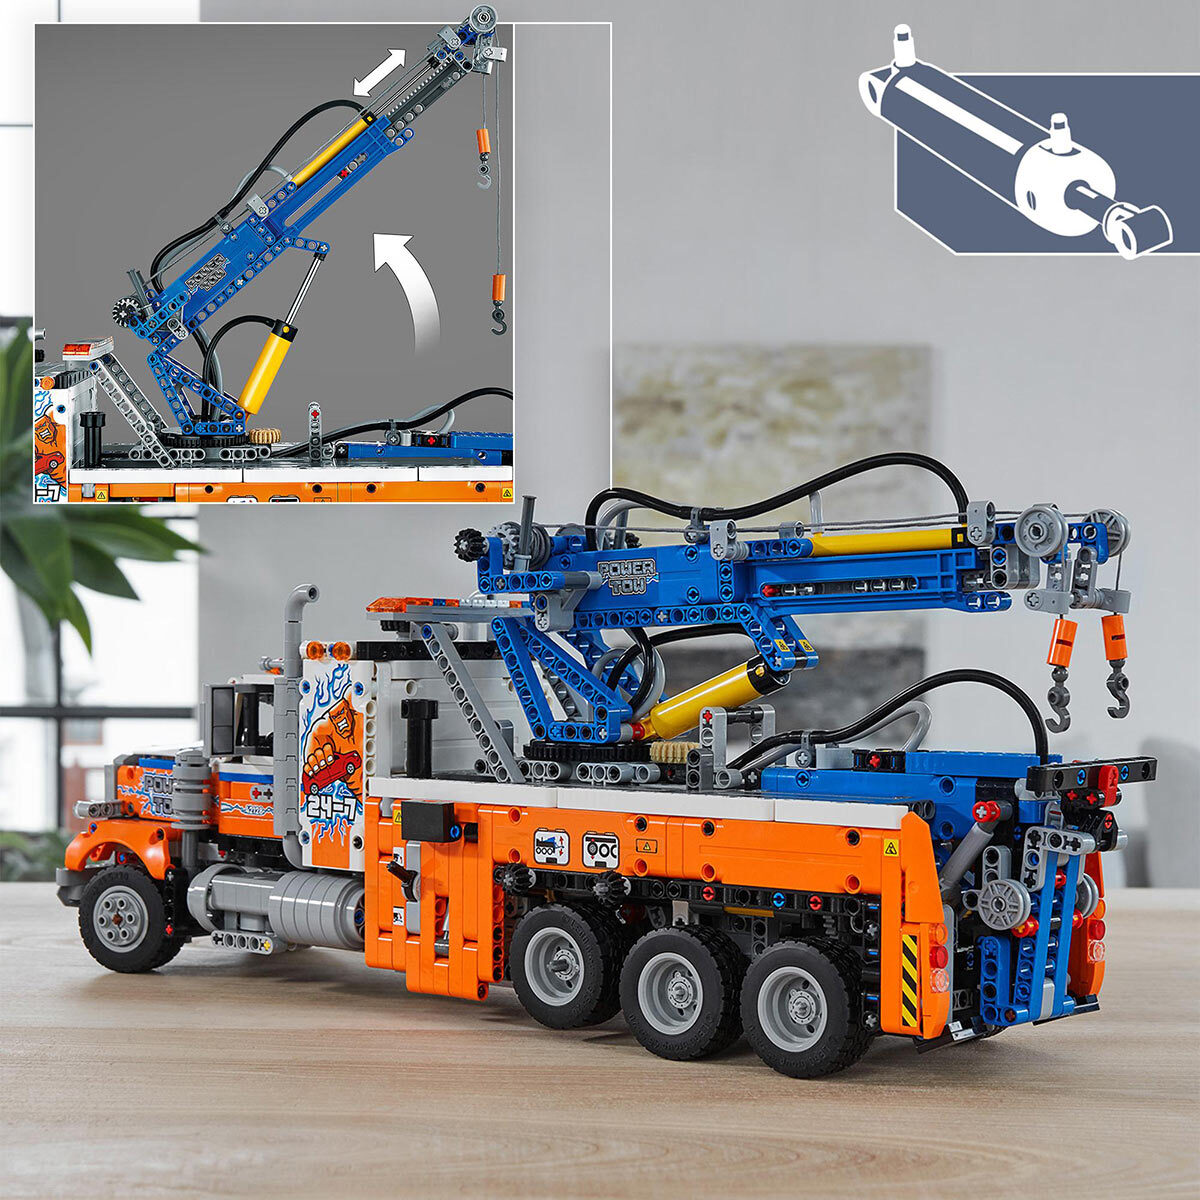 Buy LEGO Technic Heavy Duty Tow-Truck Details2 Image at Costco.co.uk